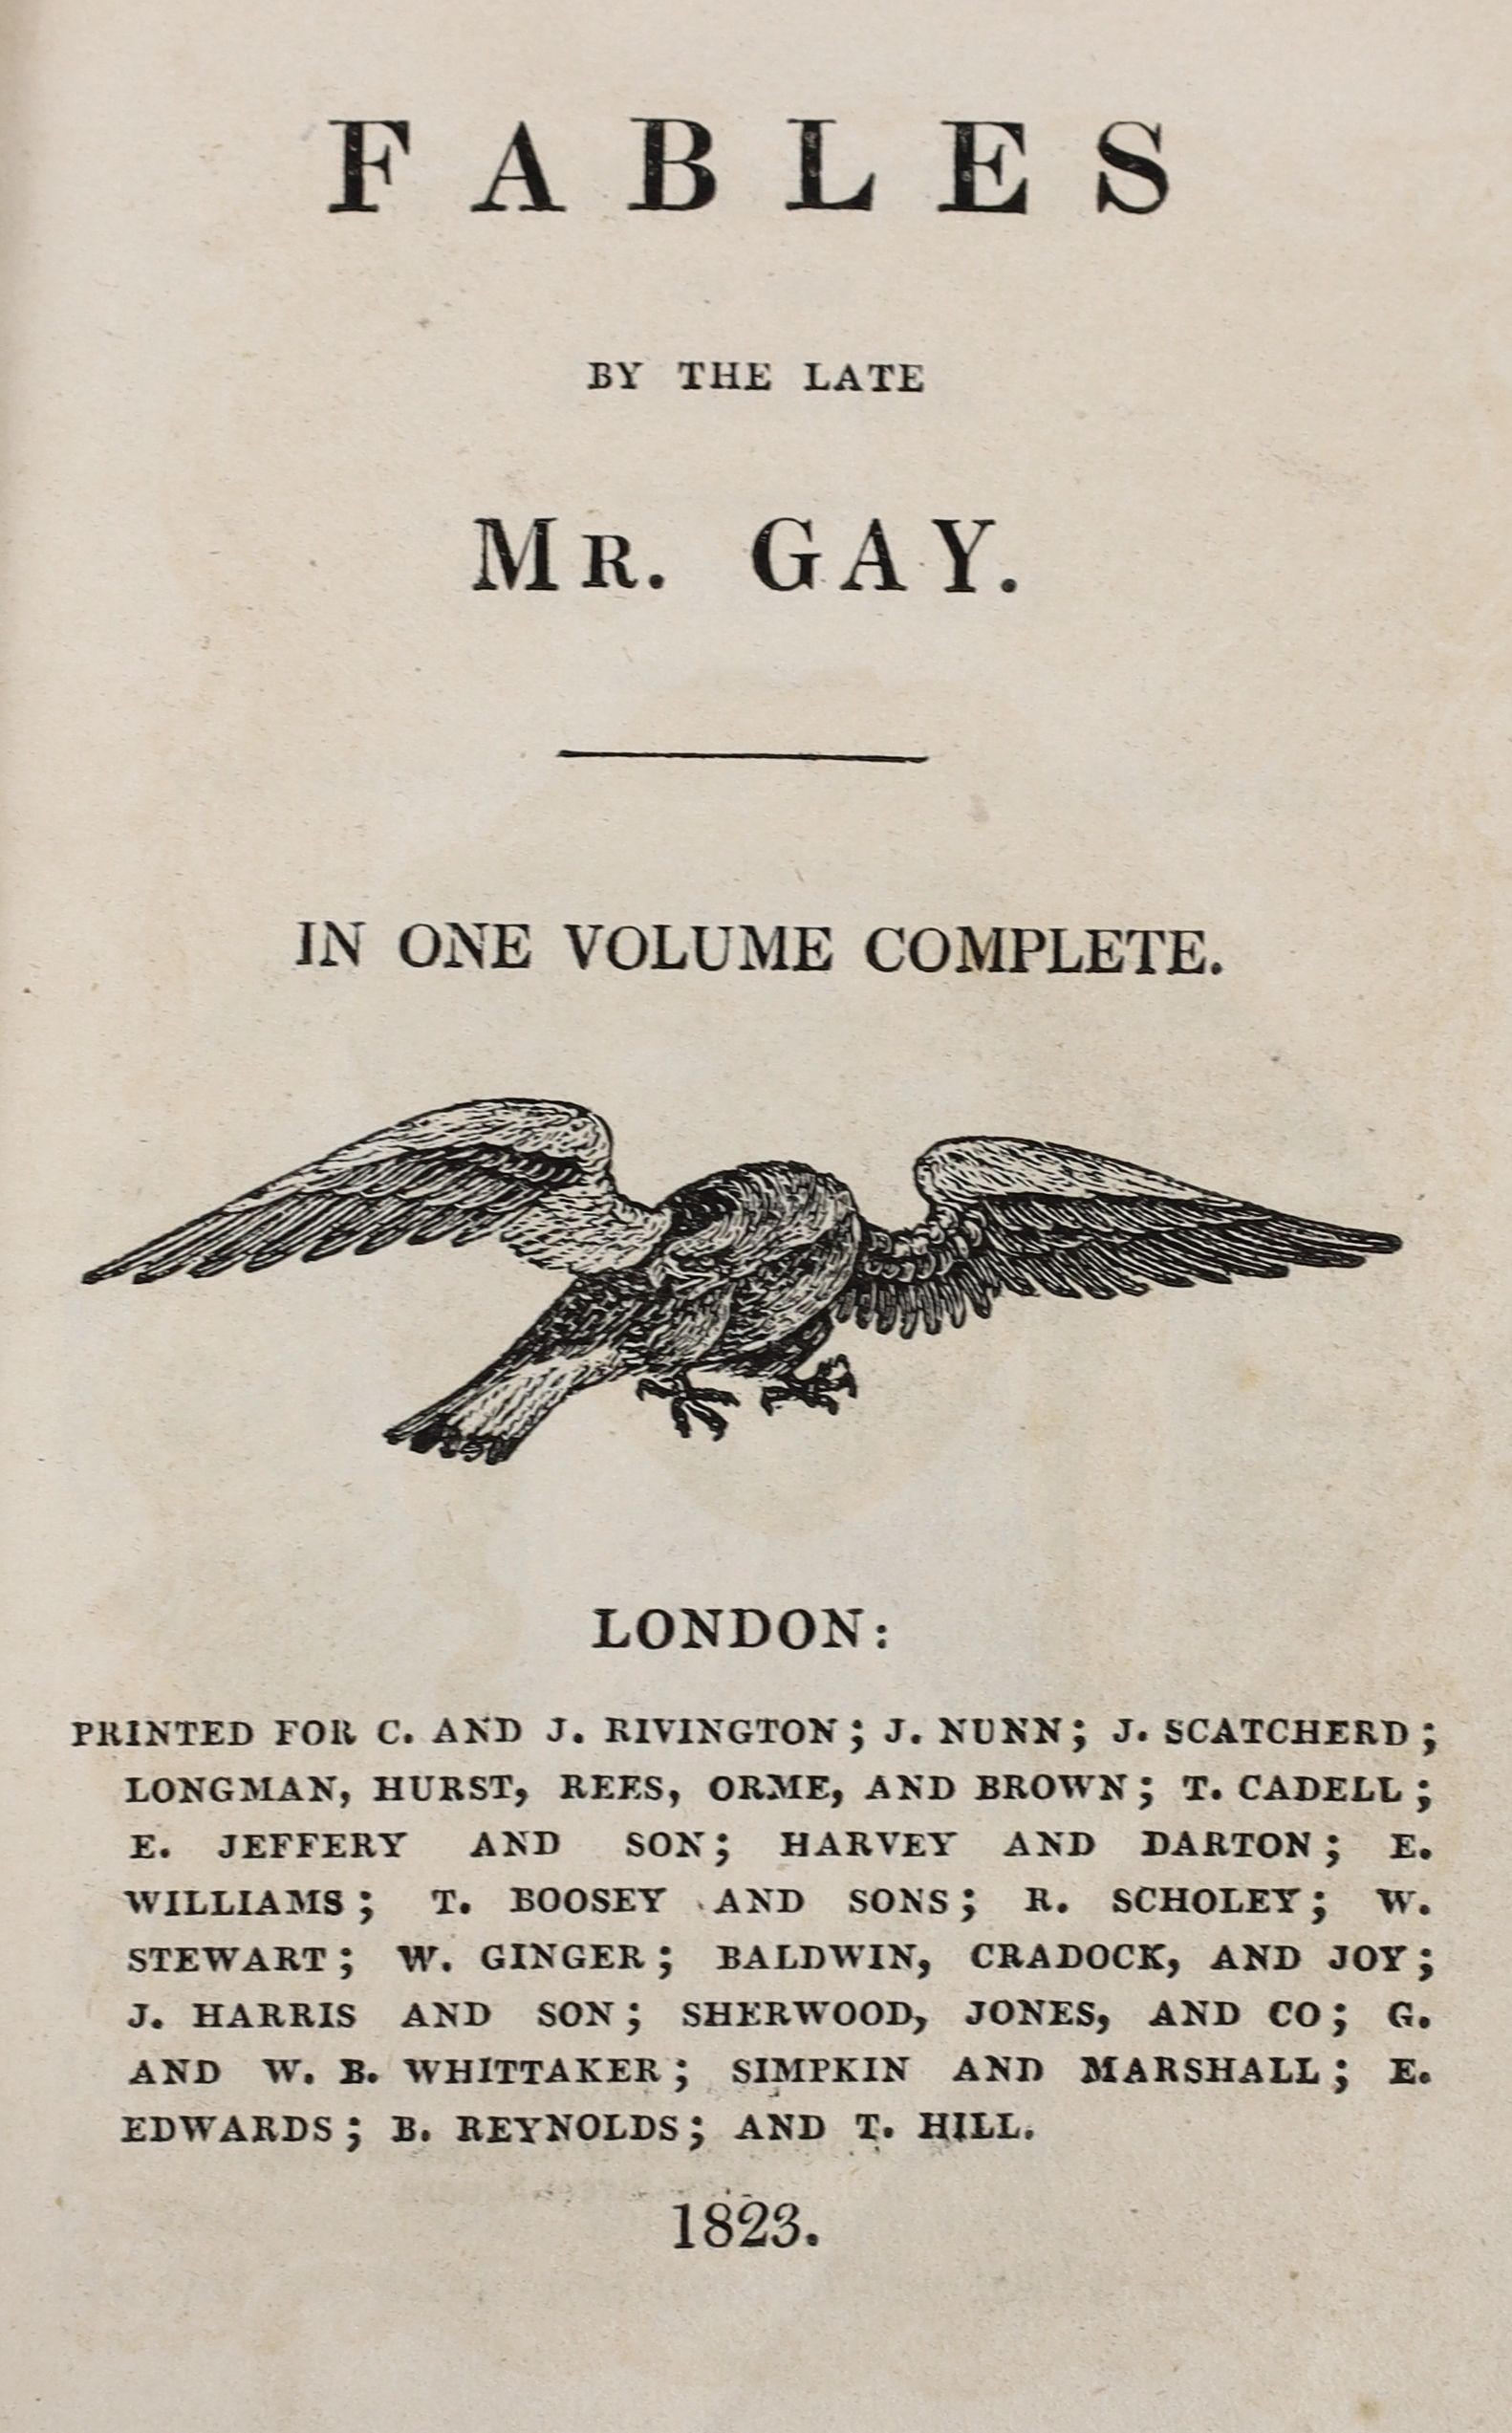 Gay, John - Fables, 2 parts in 1, 12mo, calf, illustrated with woodcuts by Thomas Bewick, T. Longman et al, London, 1796 and a further edition, 12mo, calf, front board detached, C & J. Rivington et al, London, 1823 (2)